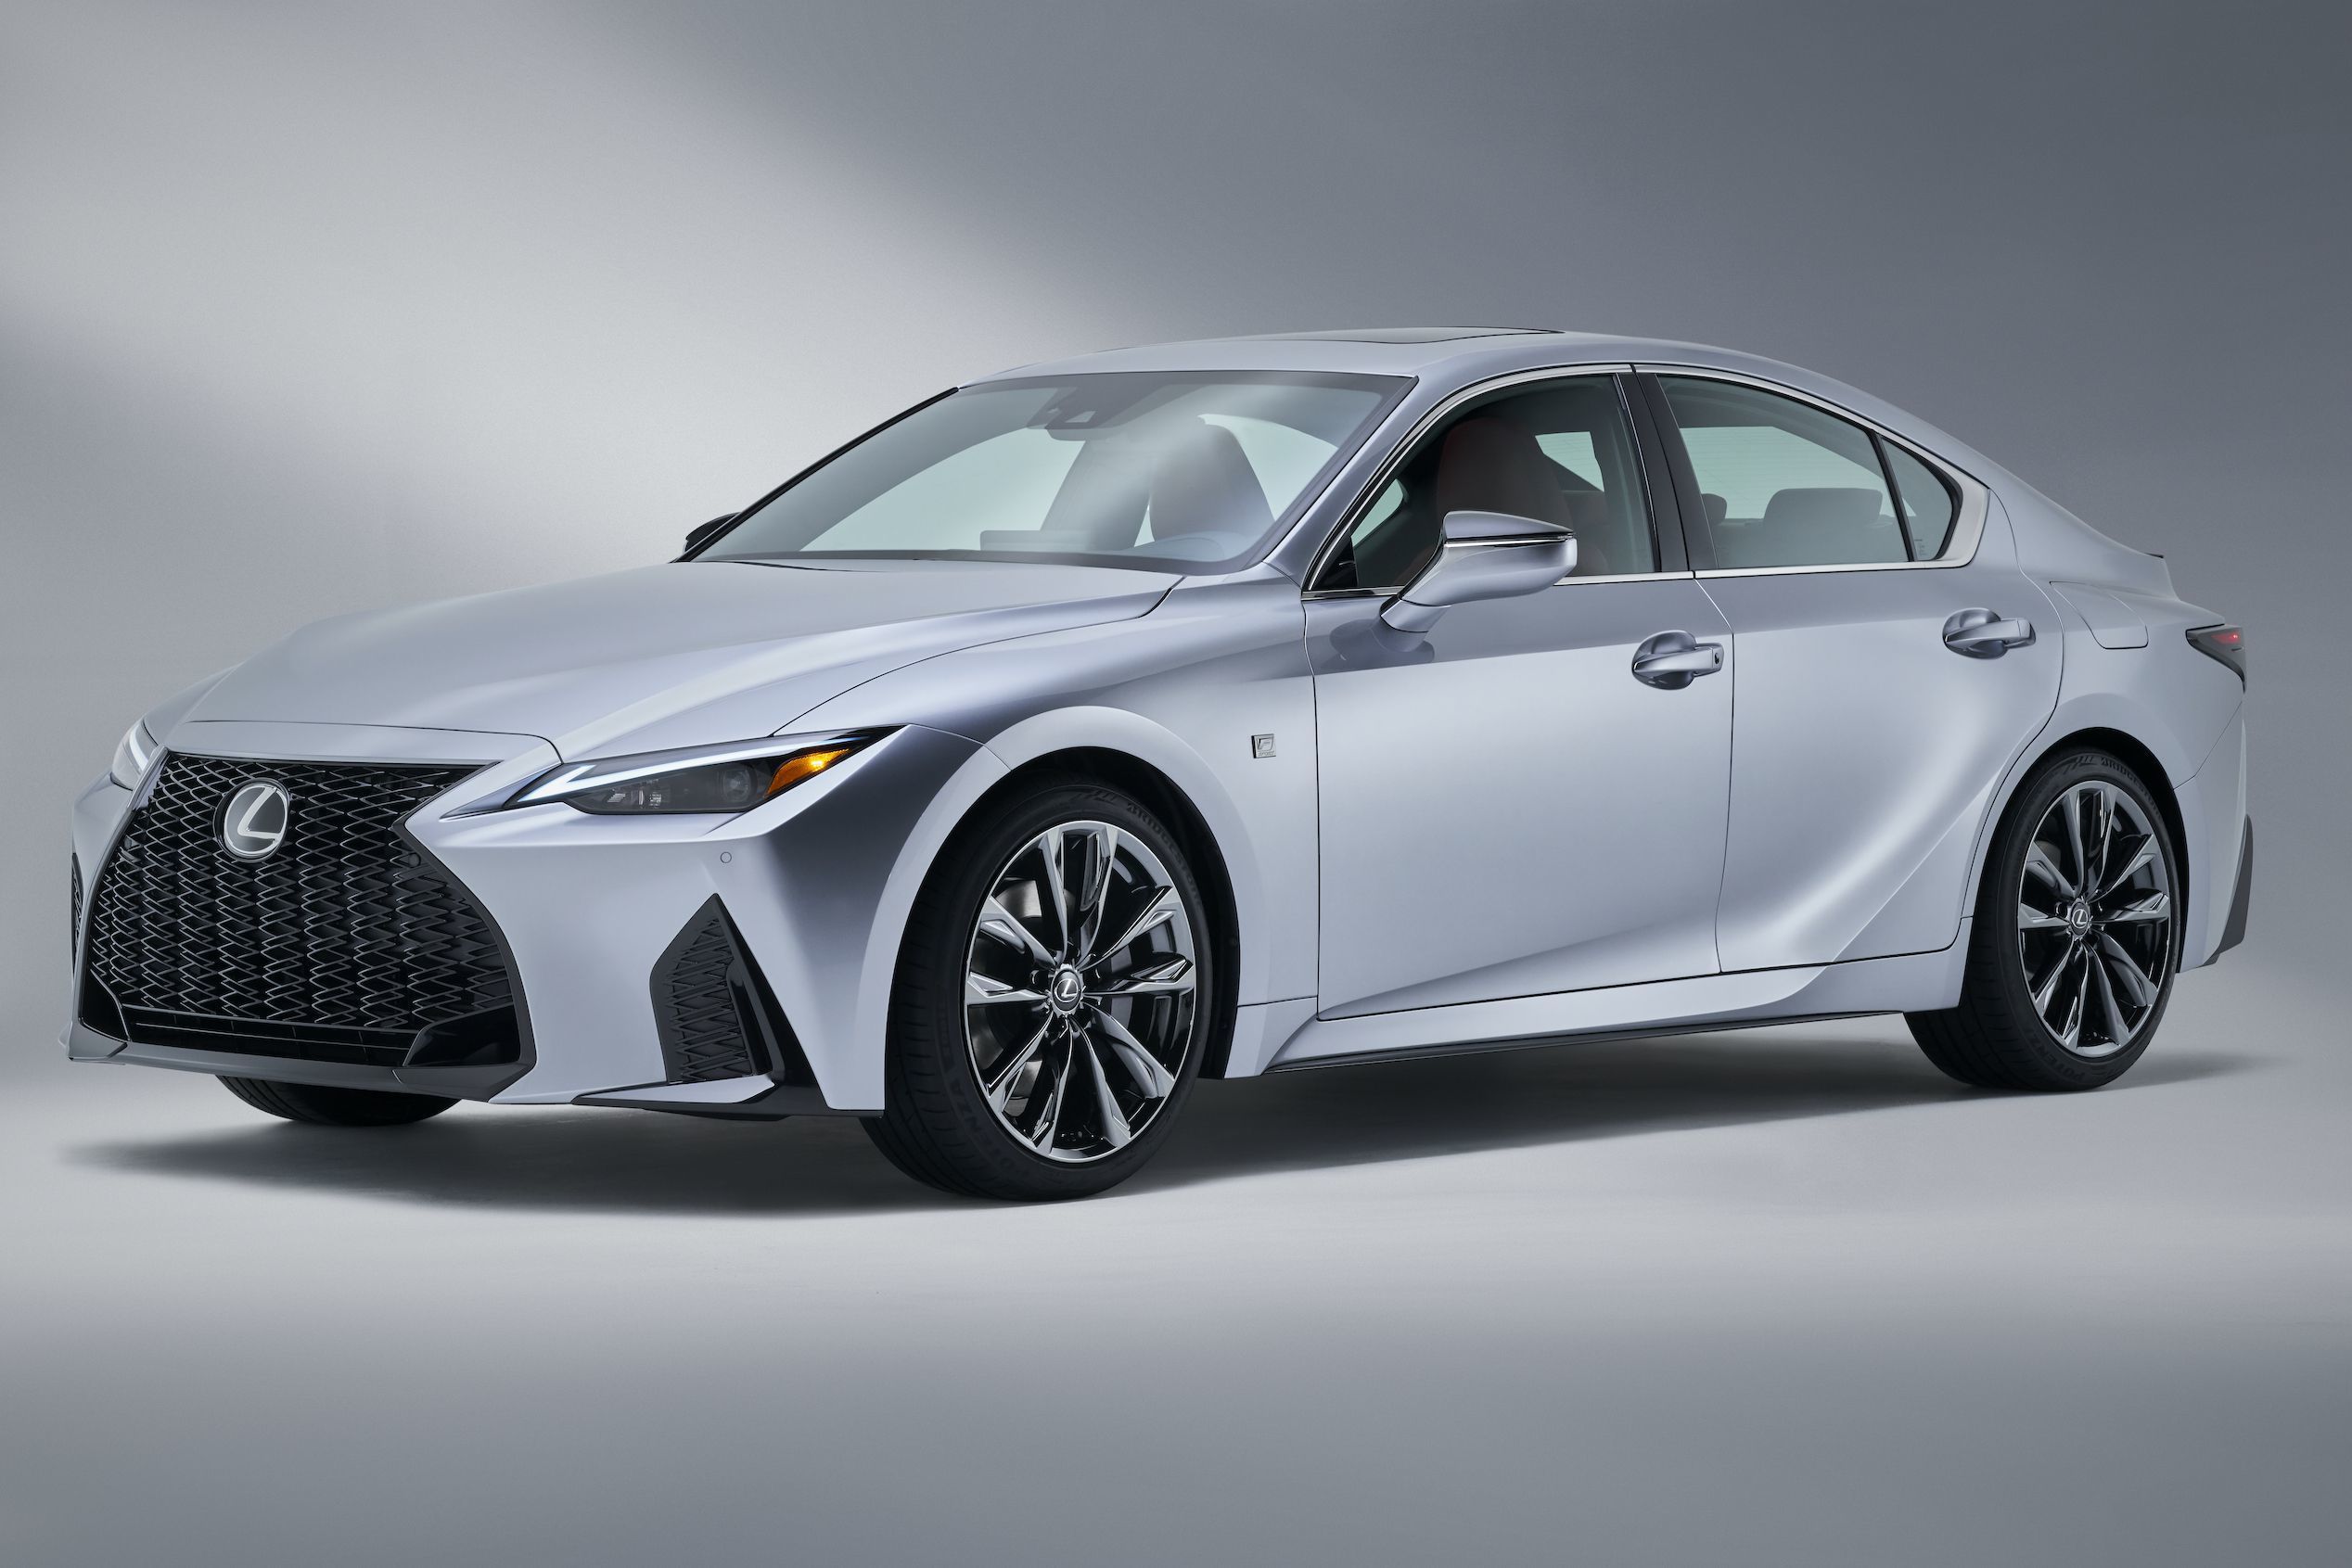 Car review: The 2021 Lexus IS makes a great companion